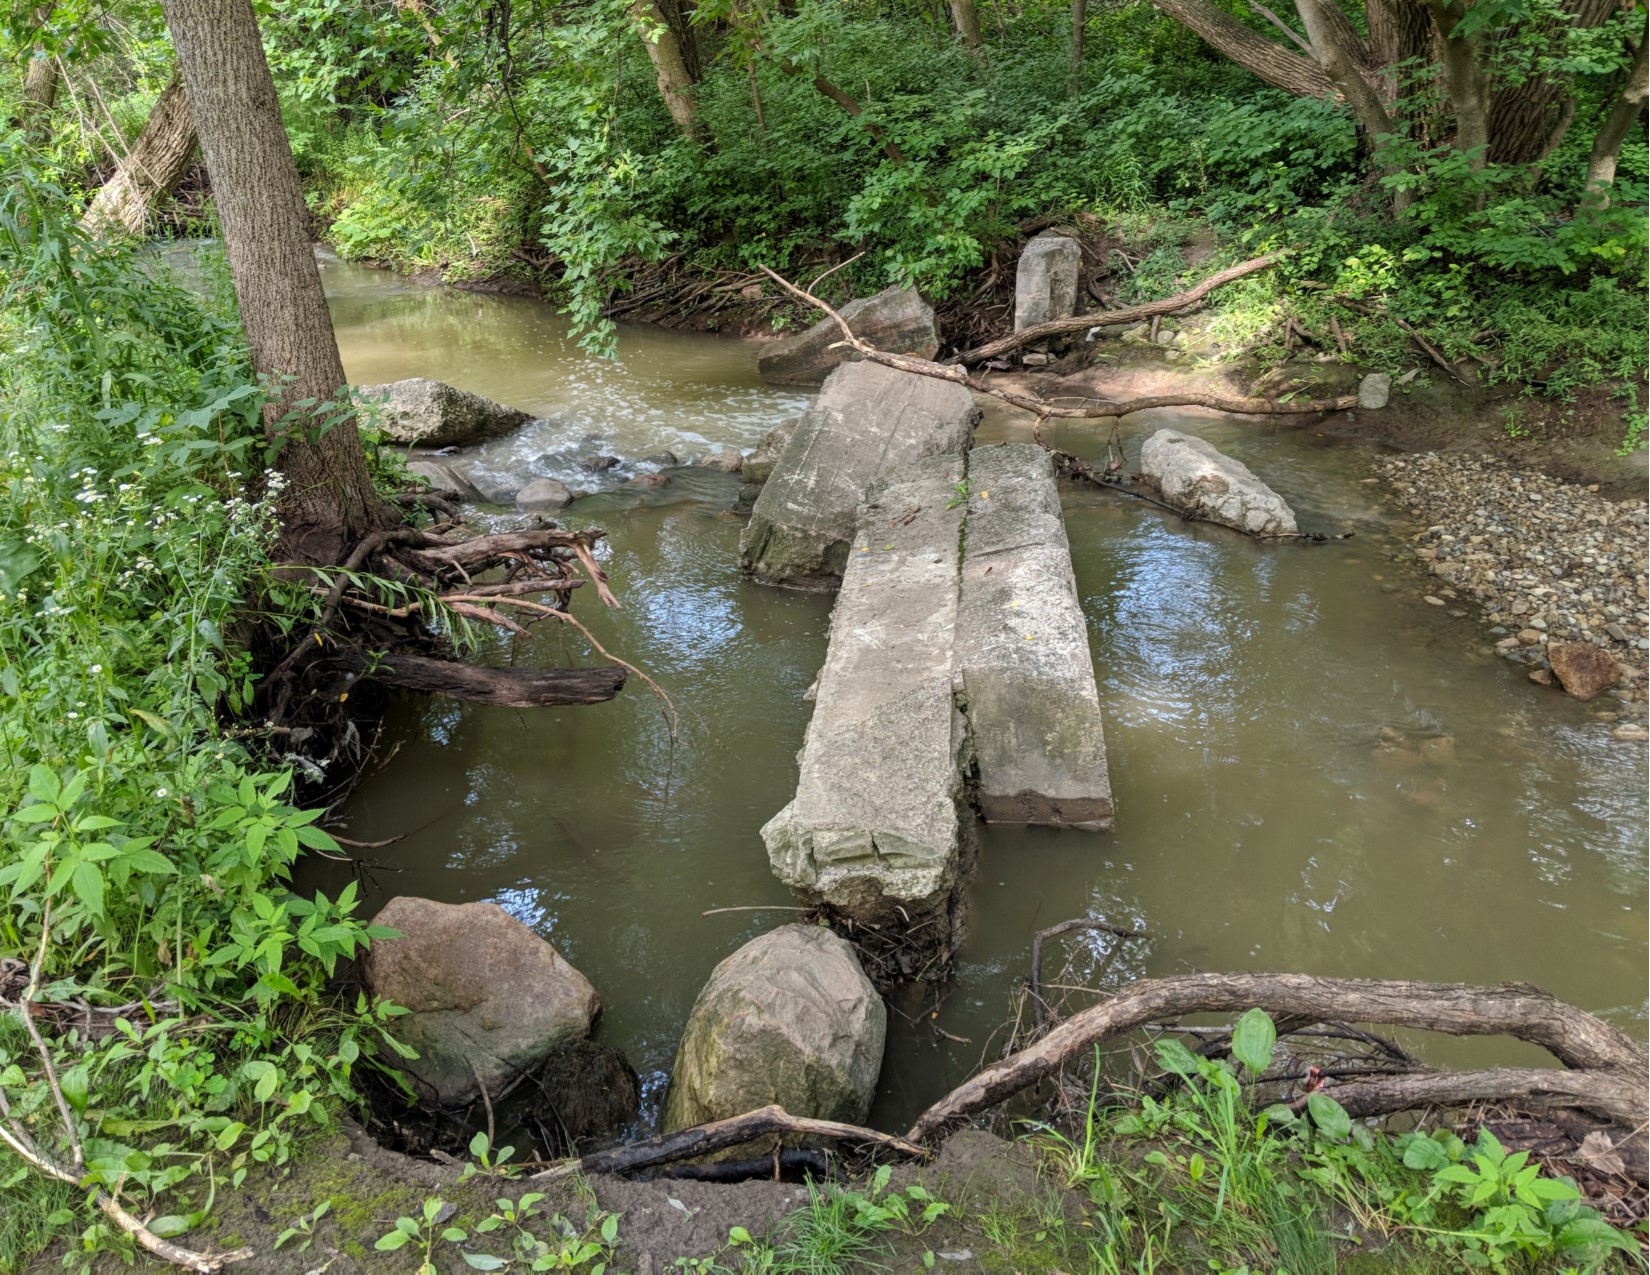 Displaced concrete weir (proposed to be removed) at the upstream portion of Site P-107 where the sanitary line is at risk of exposure.